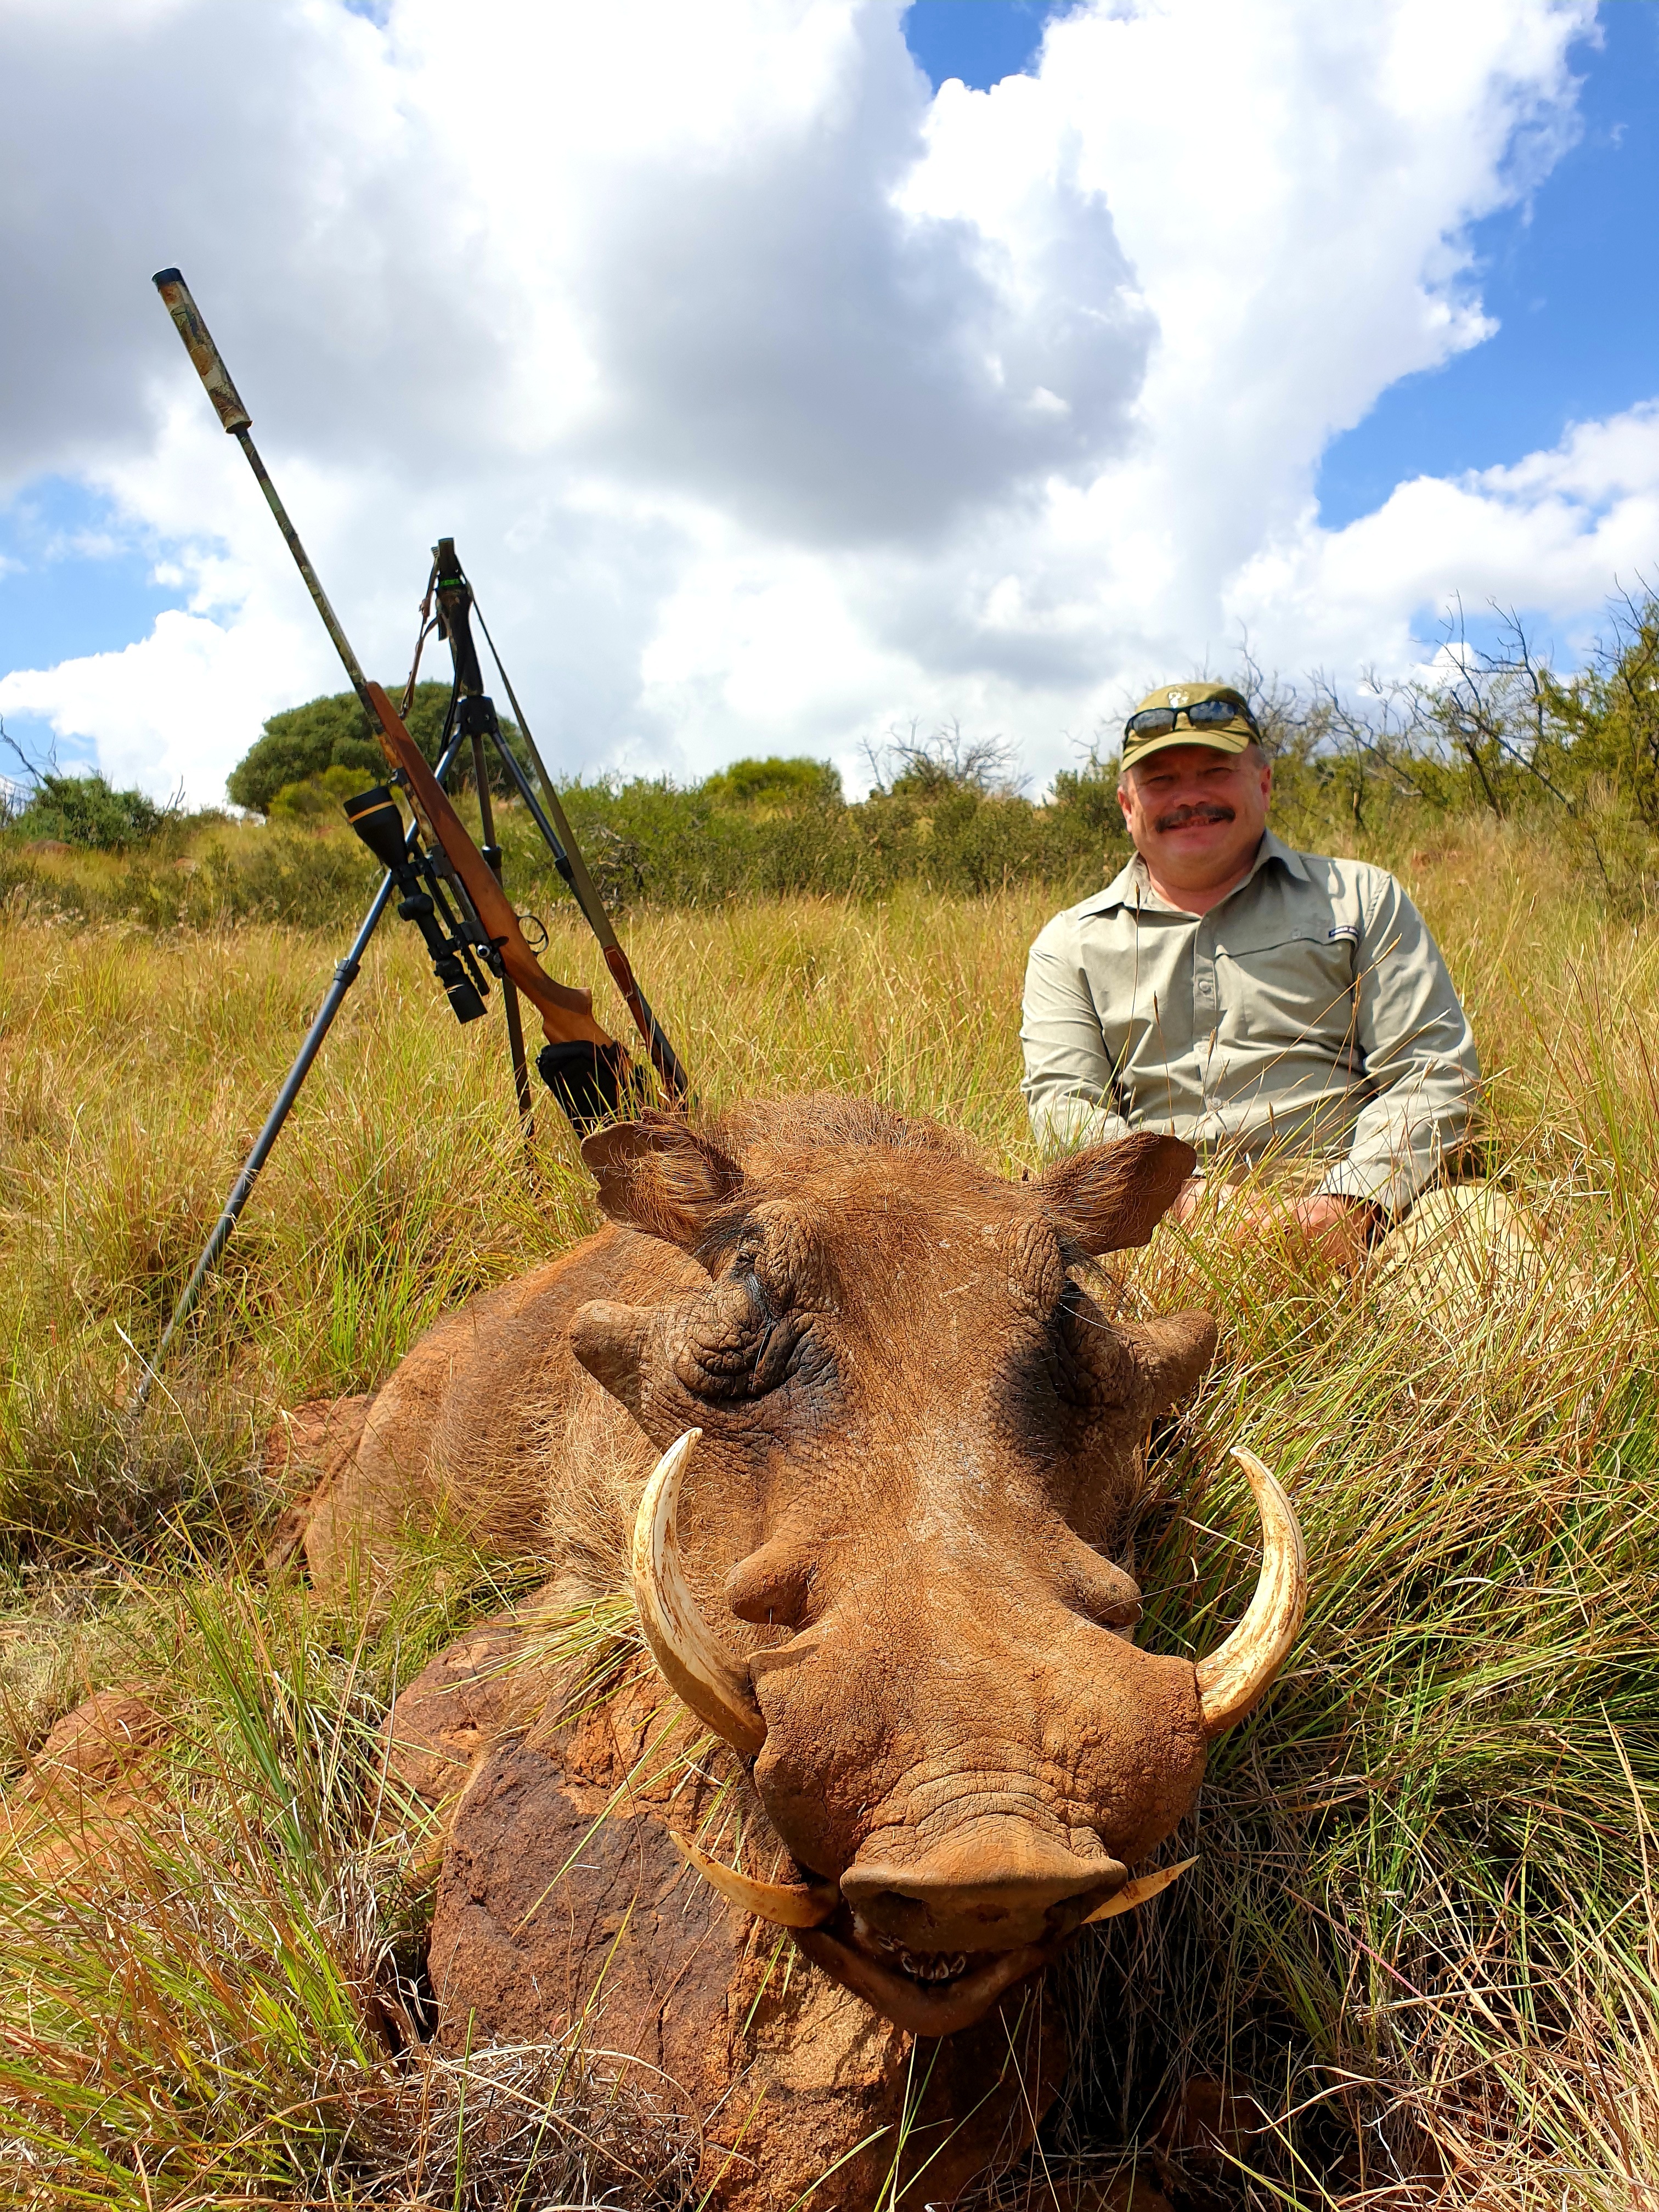 5 essential hunting tips for beginners in South Africa